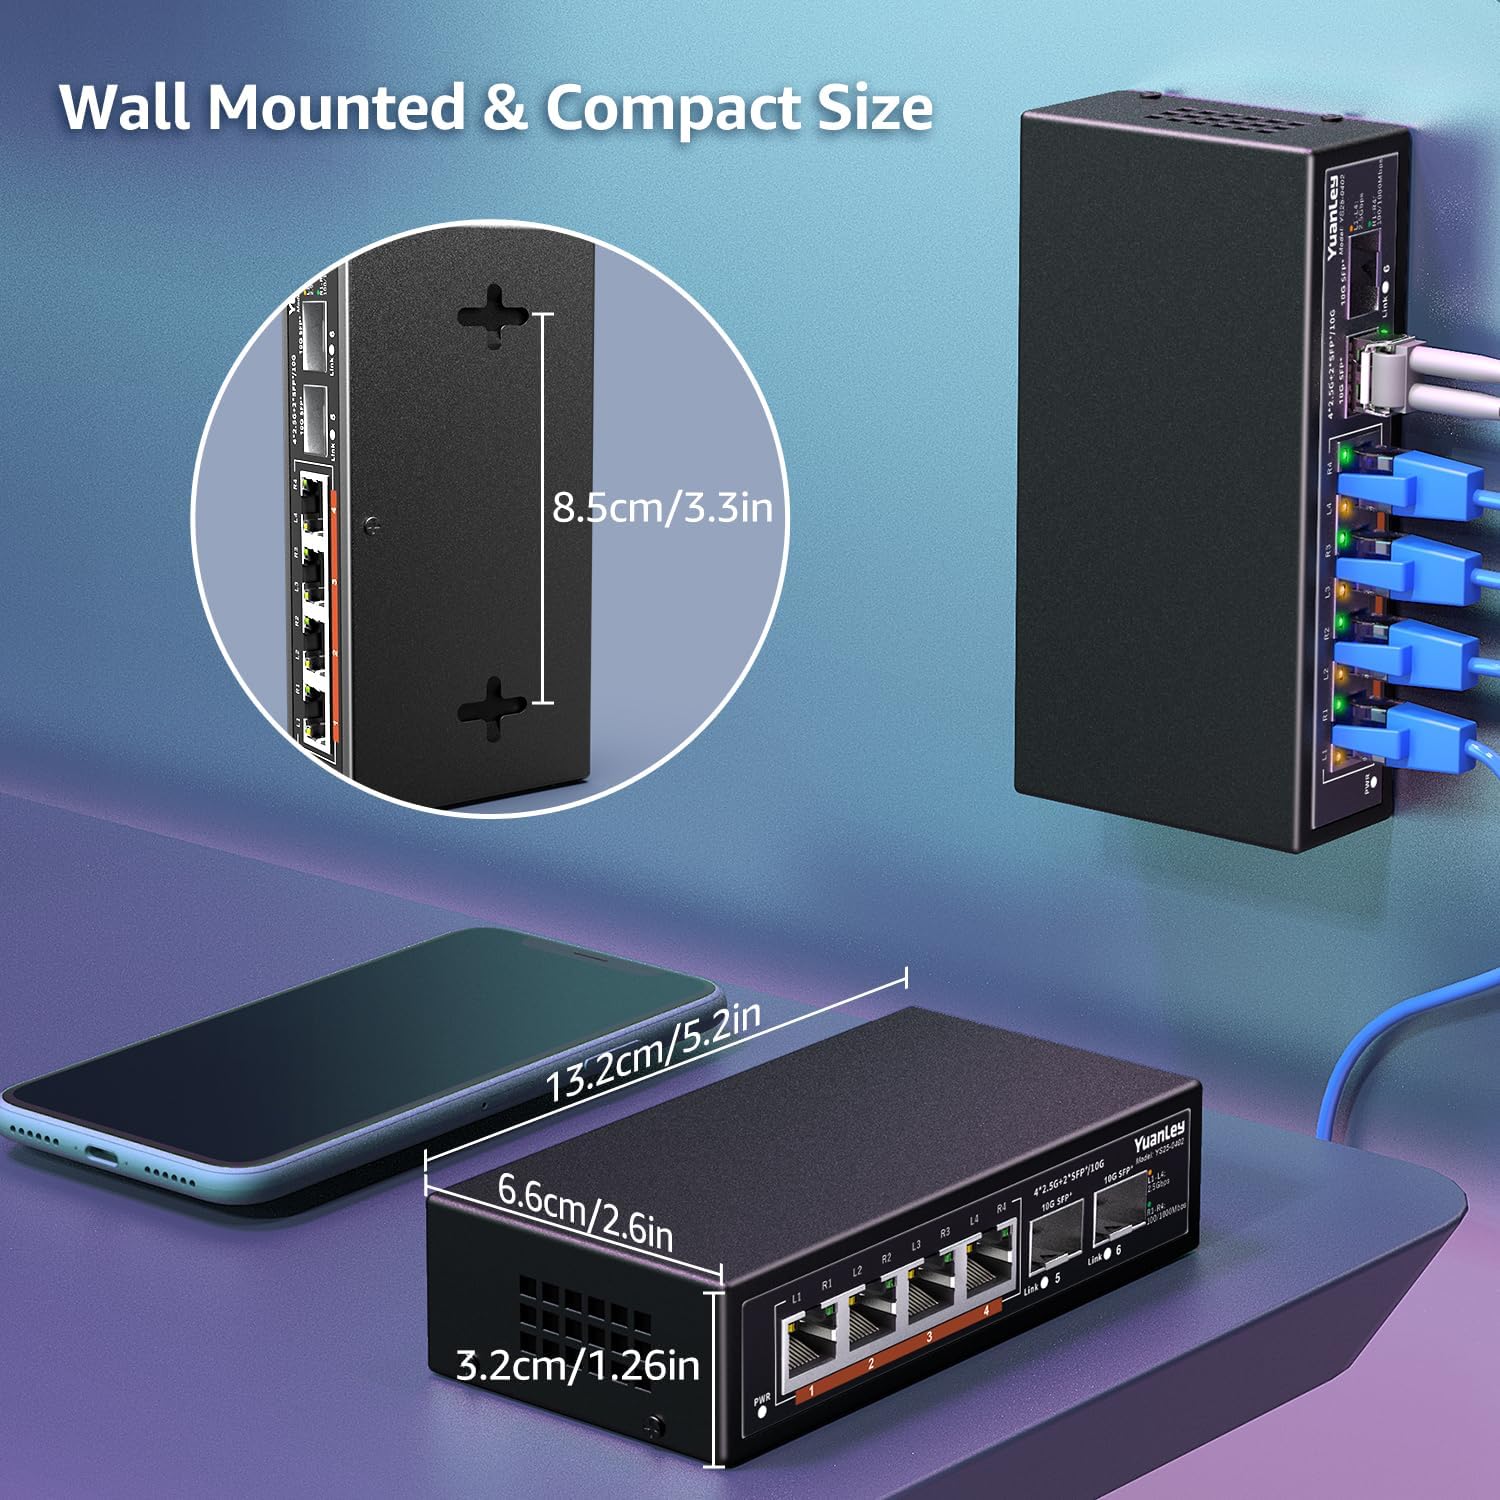 8 Port 2.5G Unmanaged Desktop Ethernet Switch with 10G SFP, 8 x 2.5G Base-T  Ports, 60Gbps Switching Capacity, Compatible with 100/1000/2500Mbps, Metal